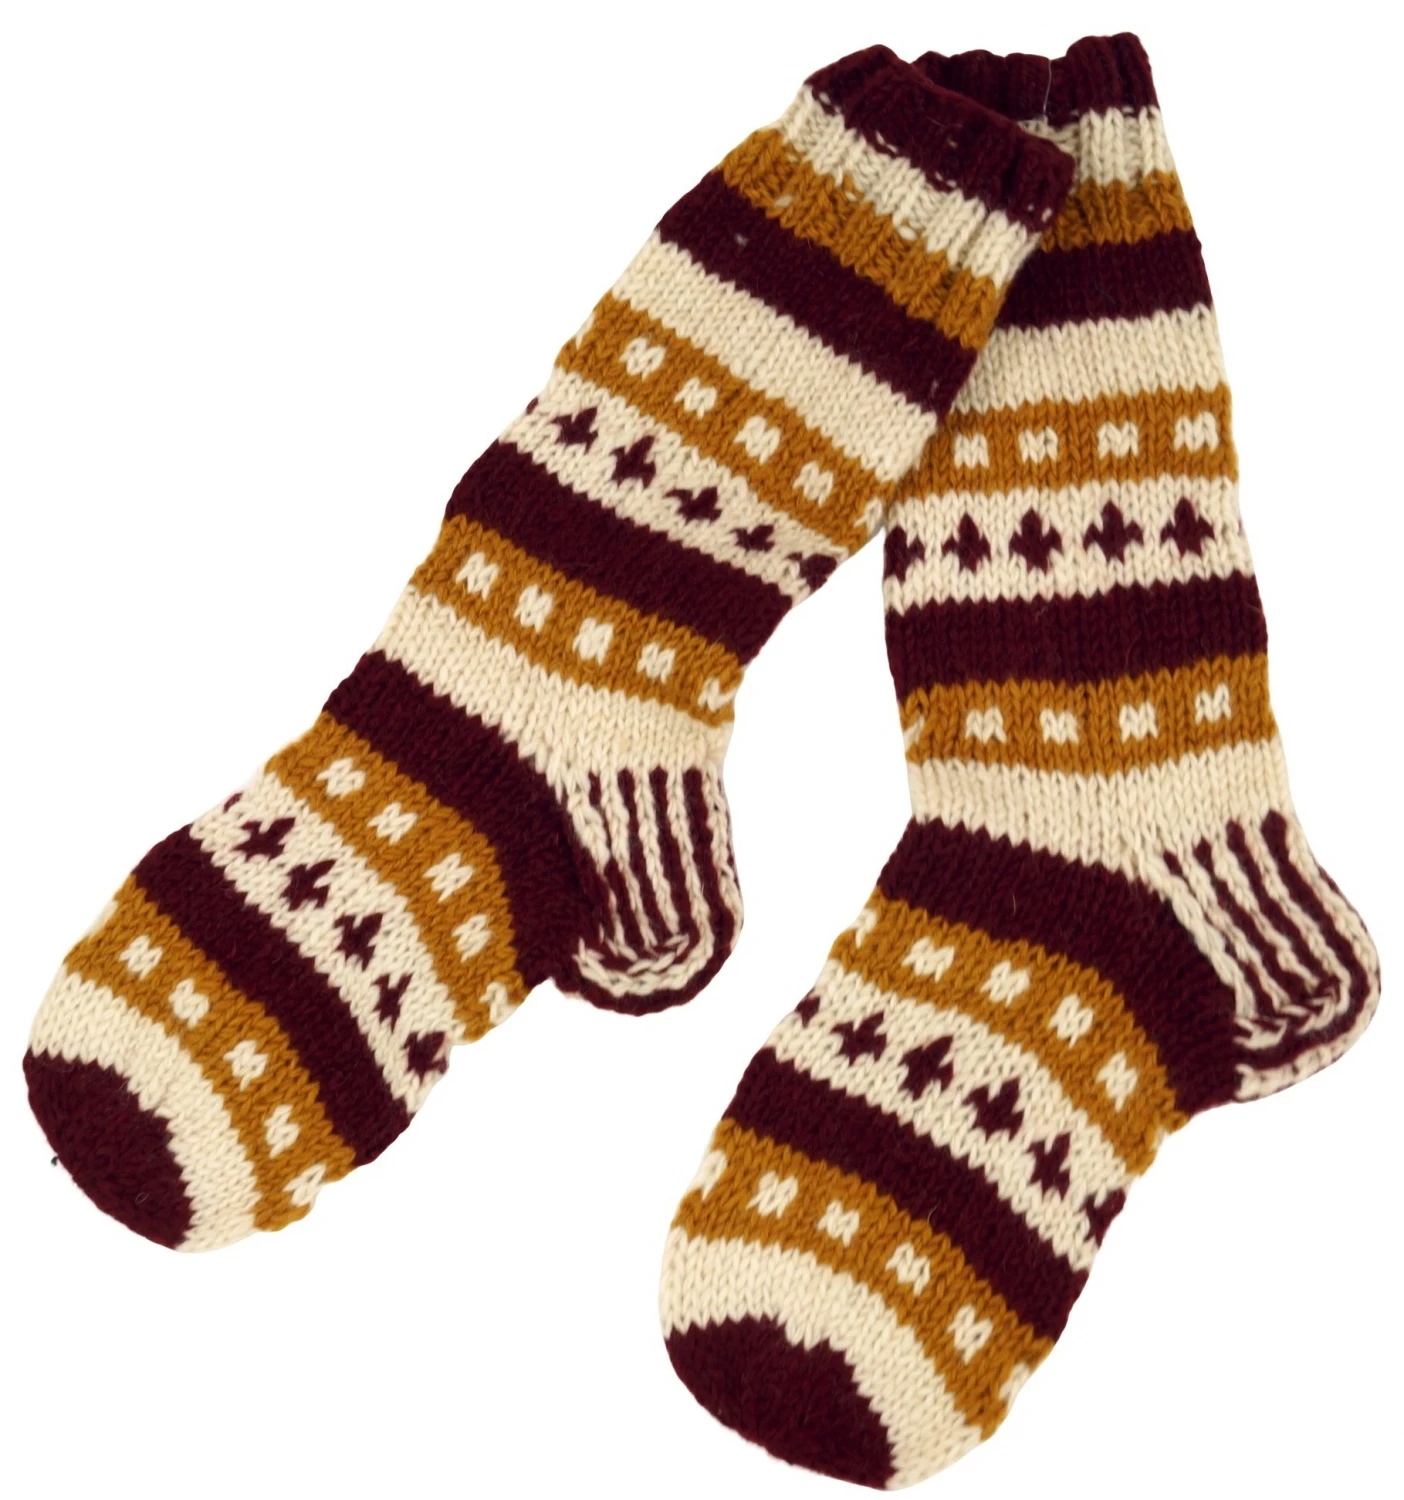 Quality Hand knitted 100/% wool   Fleece lined adult socks Made in Kathmandu Valley